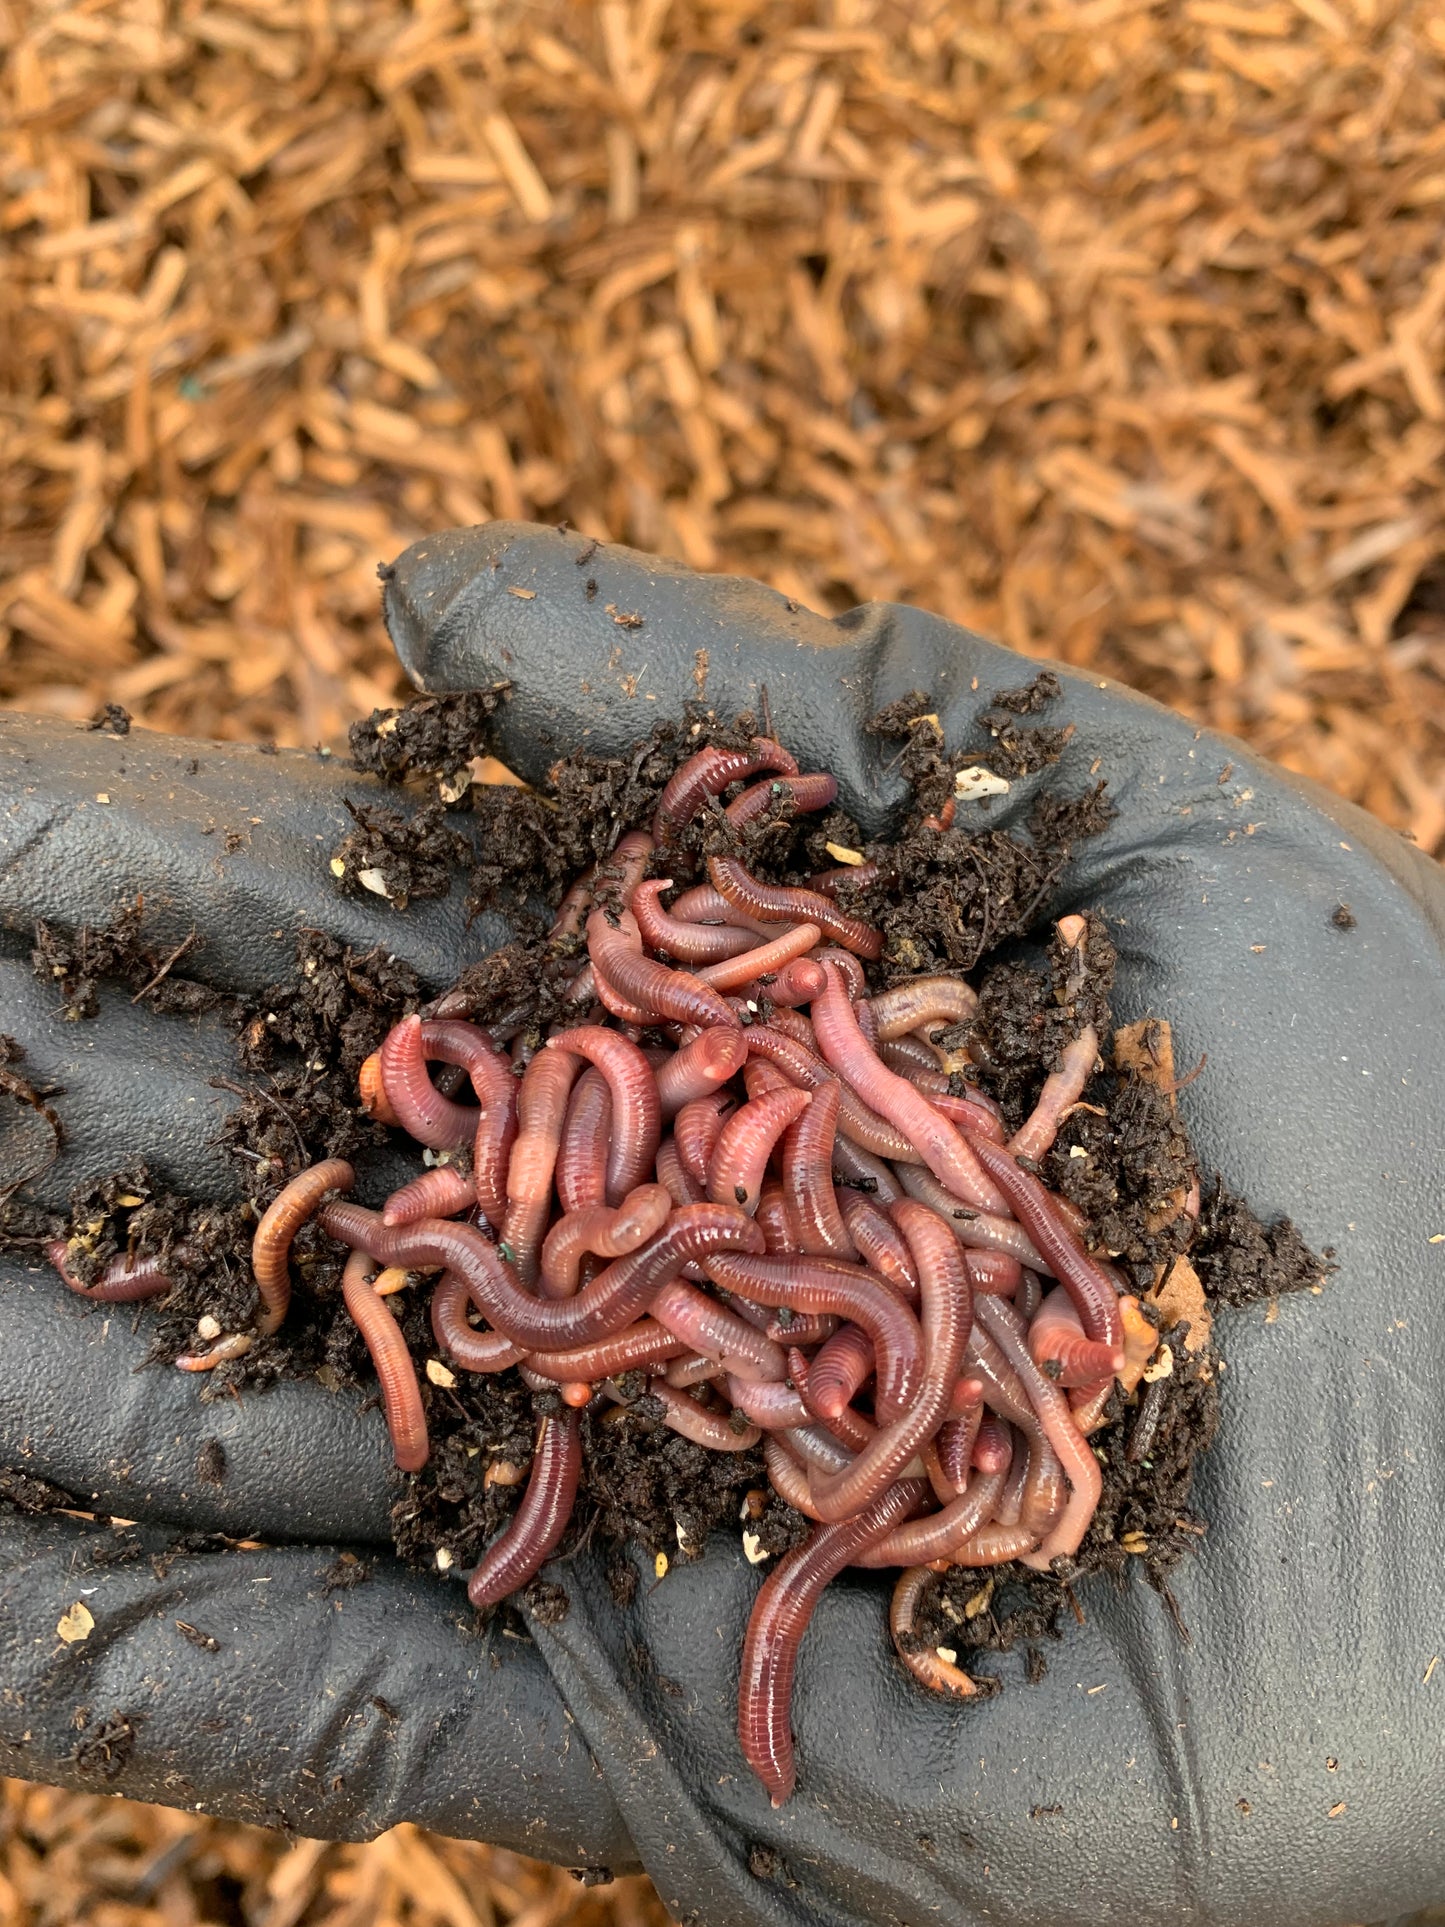 Red Wigglers (Eisenia fetida) by the Pound